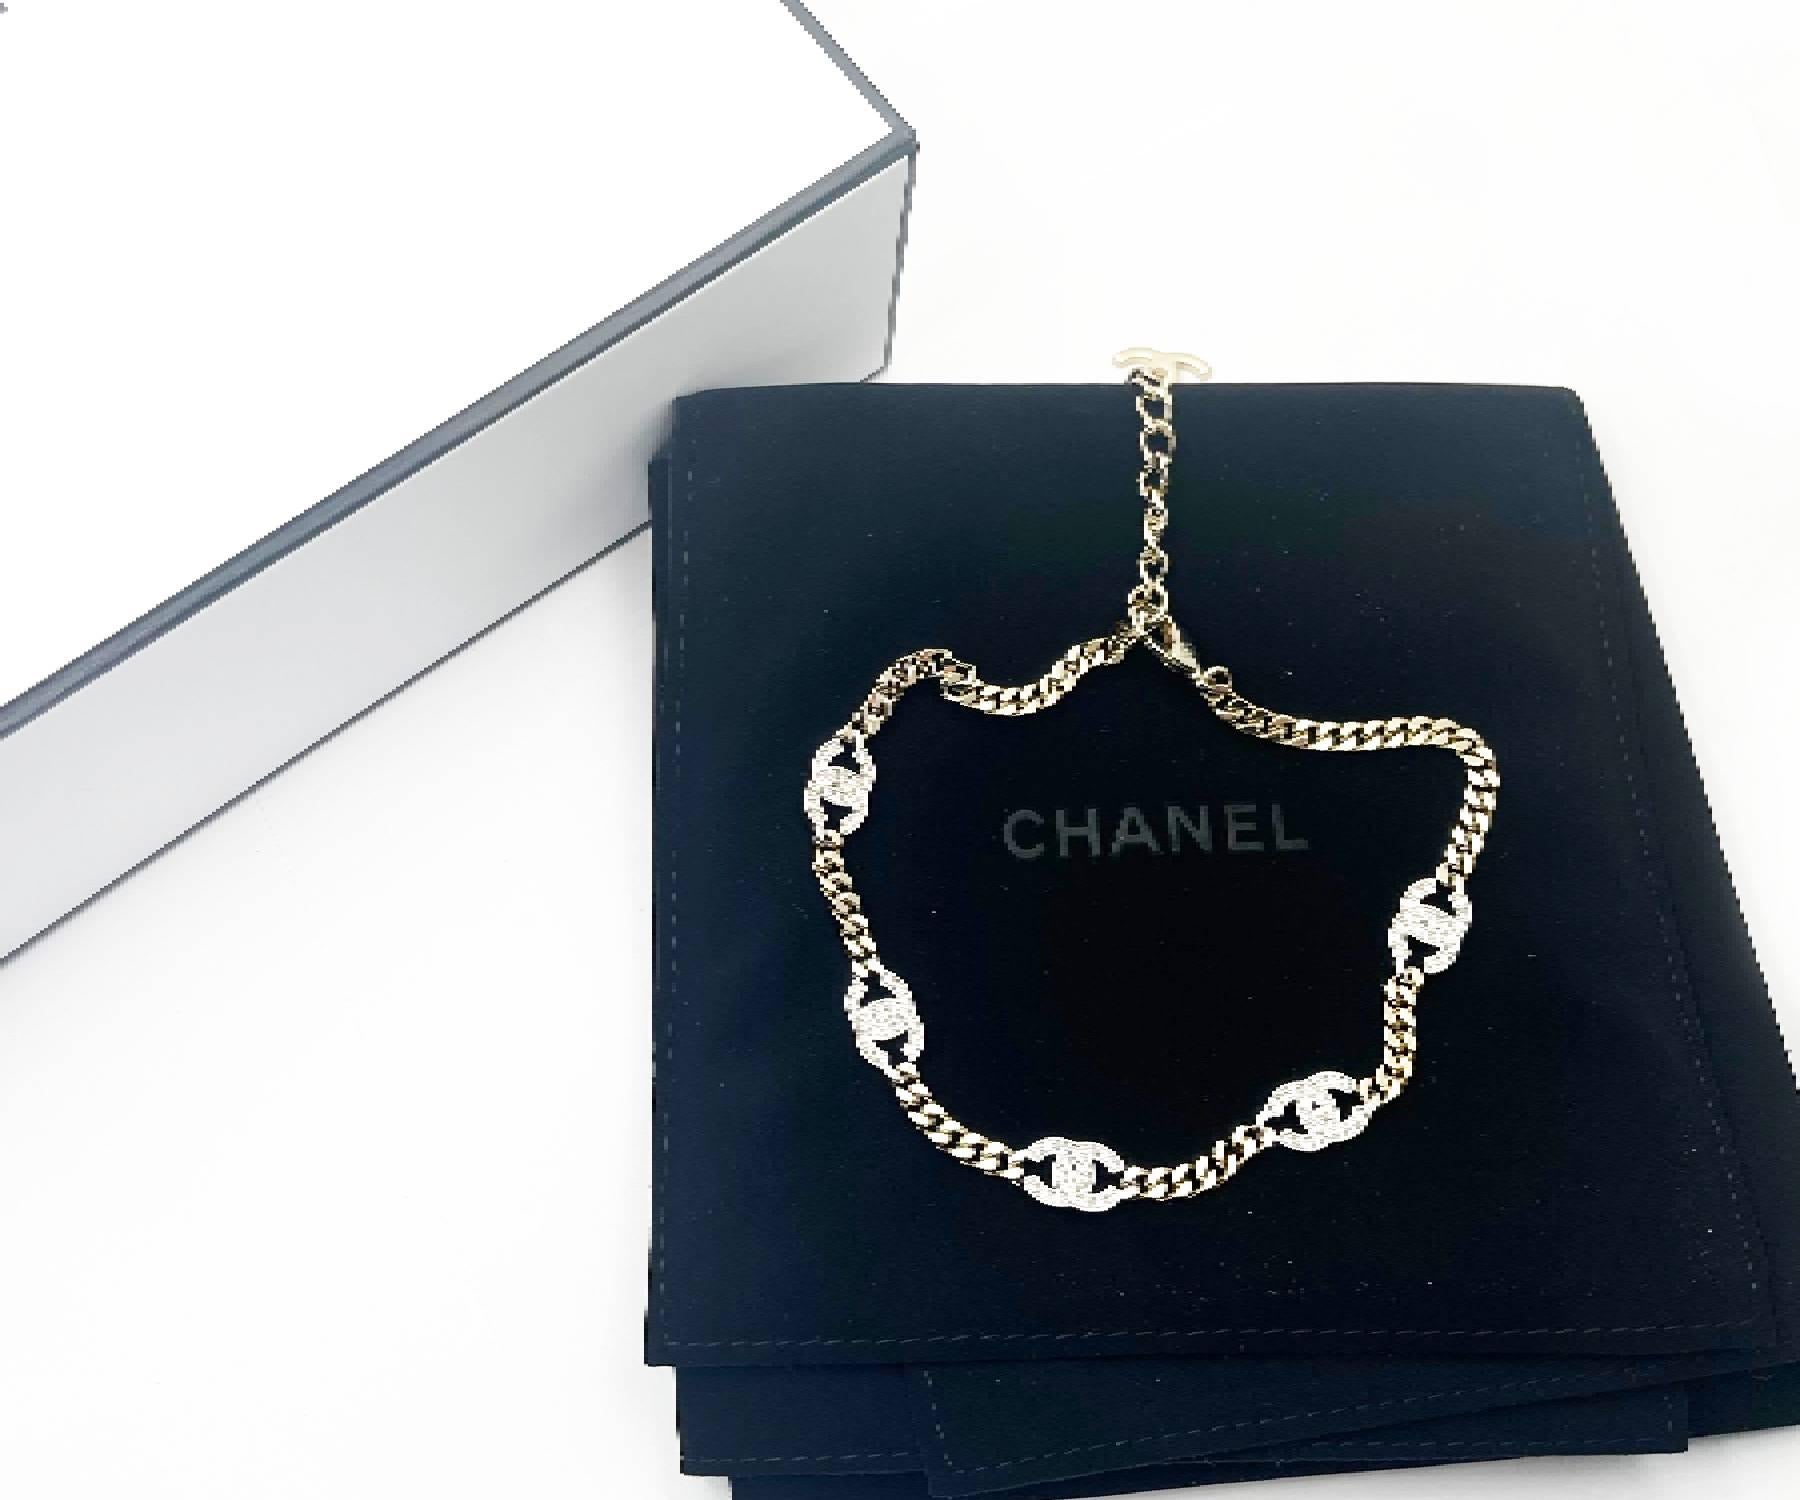 Chanel 5 Silver CC Crystal Gold Chain Choker Necklace

* Marked 21
* Made in Italy
* Comes with the original box and pouch.

-It is approximately 13″ to 16